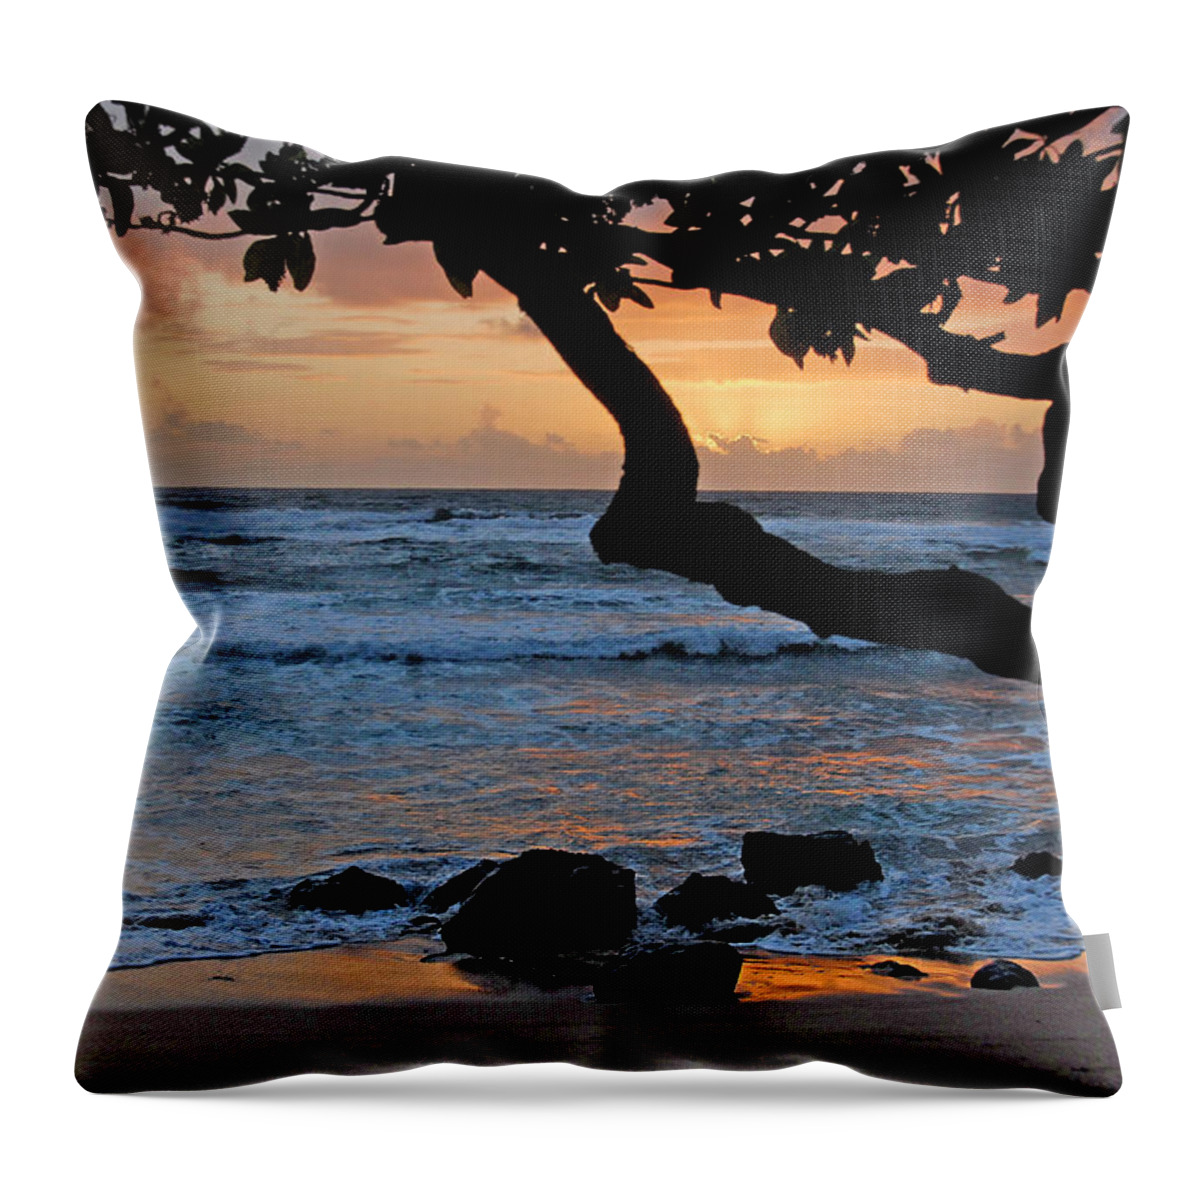 Sunrise Throw Pillow featuring the photograph Beach Sunrise by Ted Keller